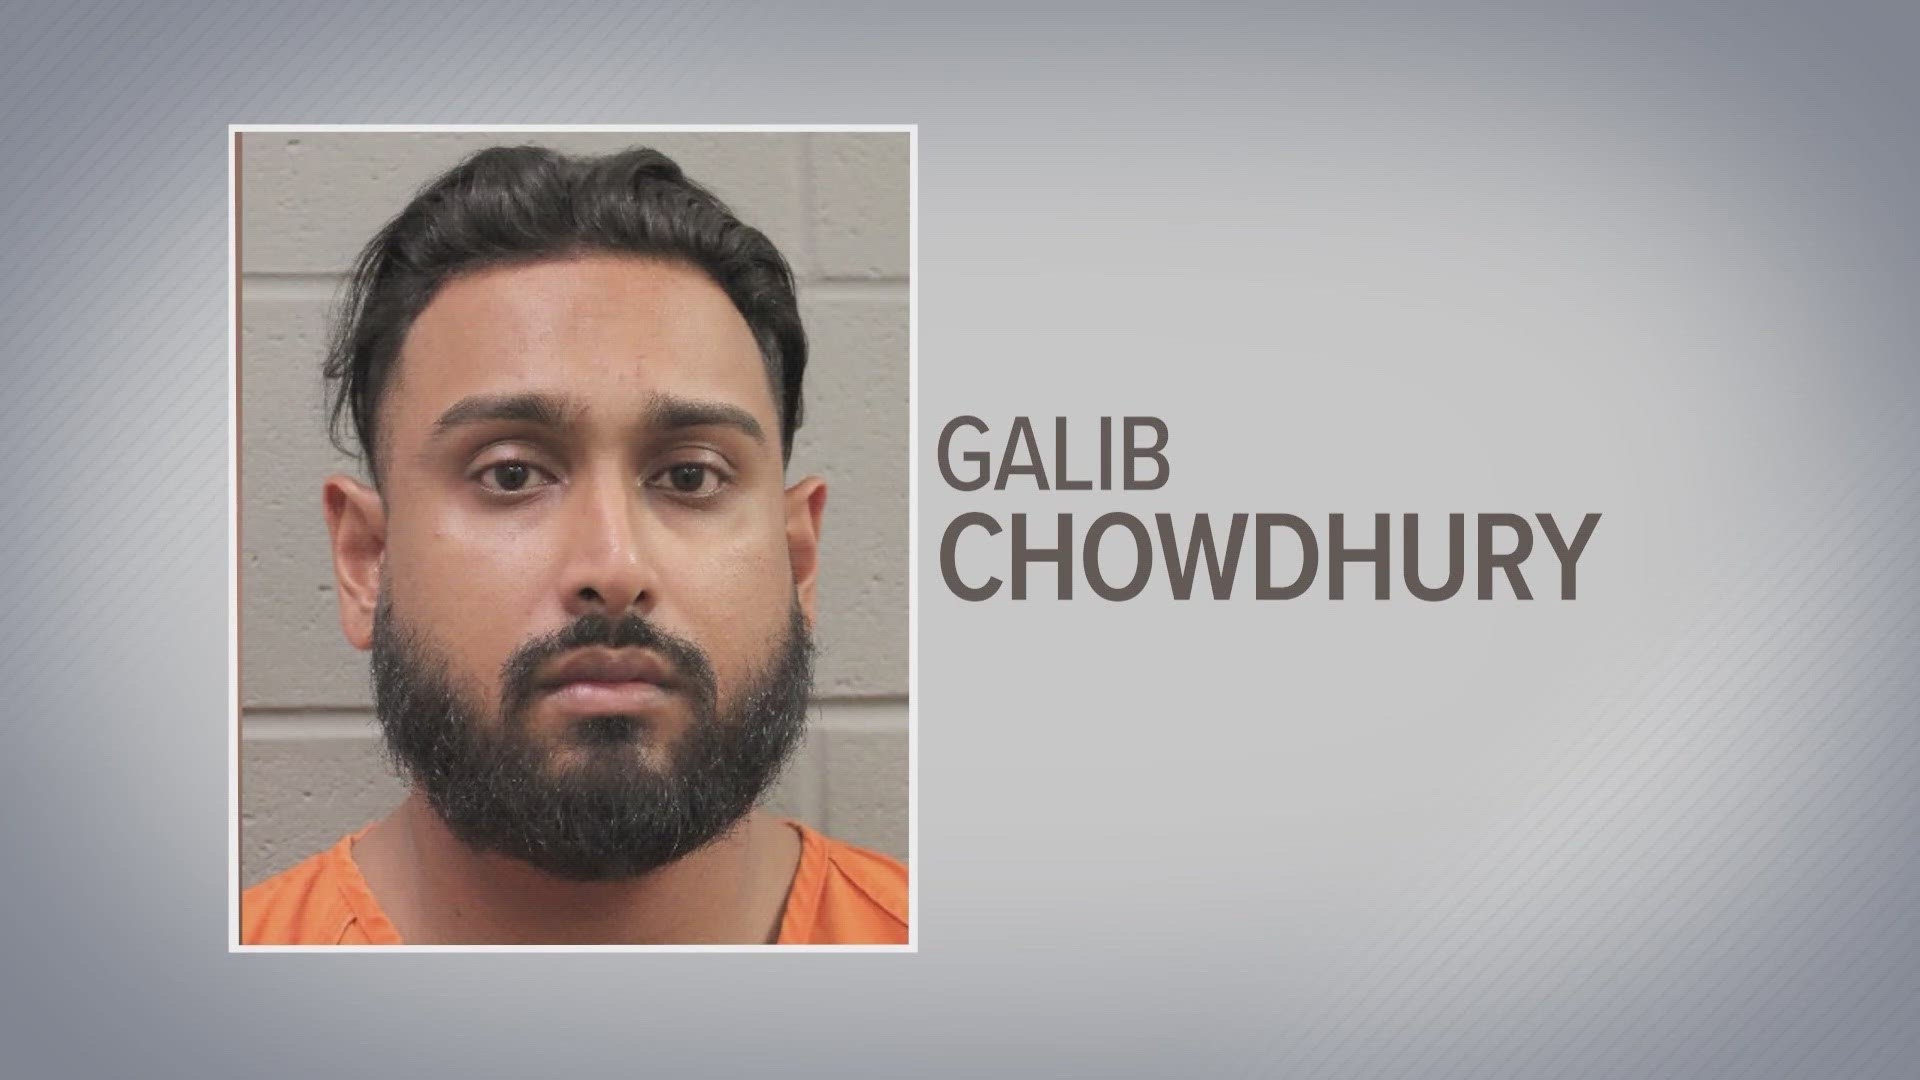 Galib Waheed Chowdhury, 31, is accused of shooting his wife during an apparent domestic violence incident early Monday morning.